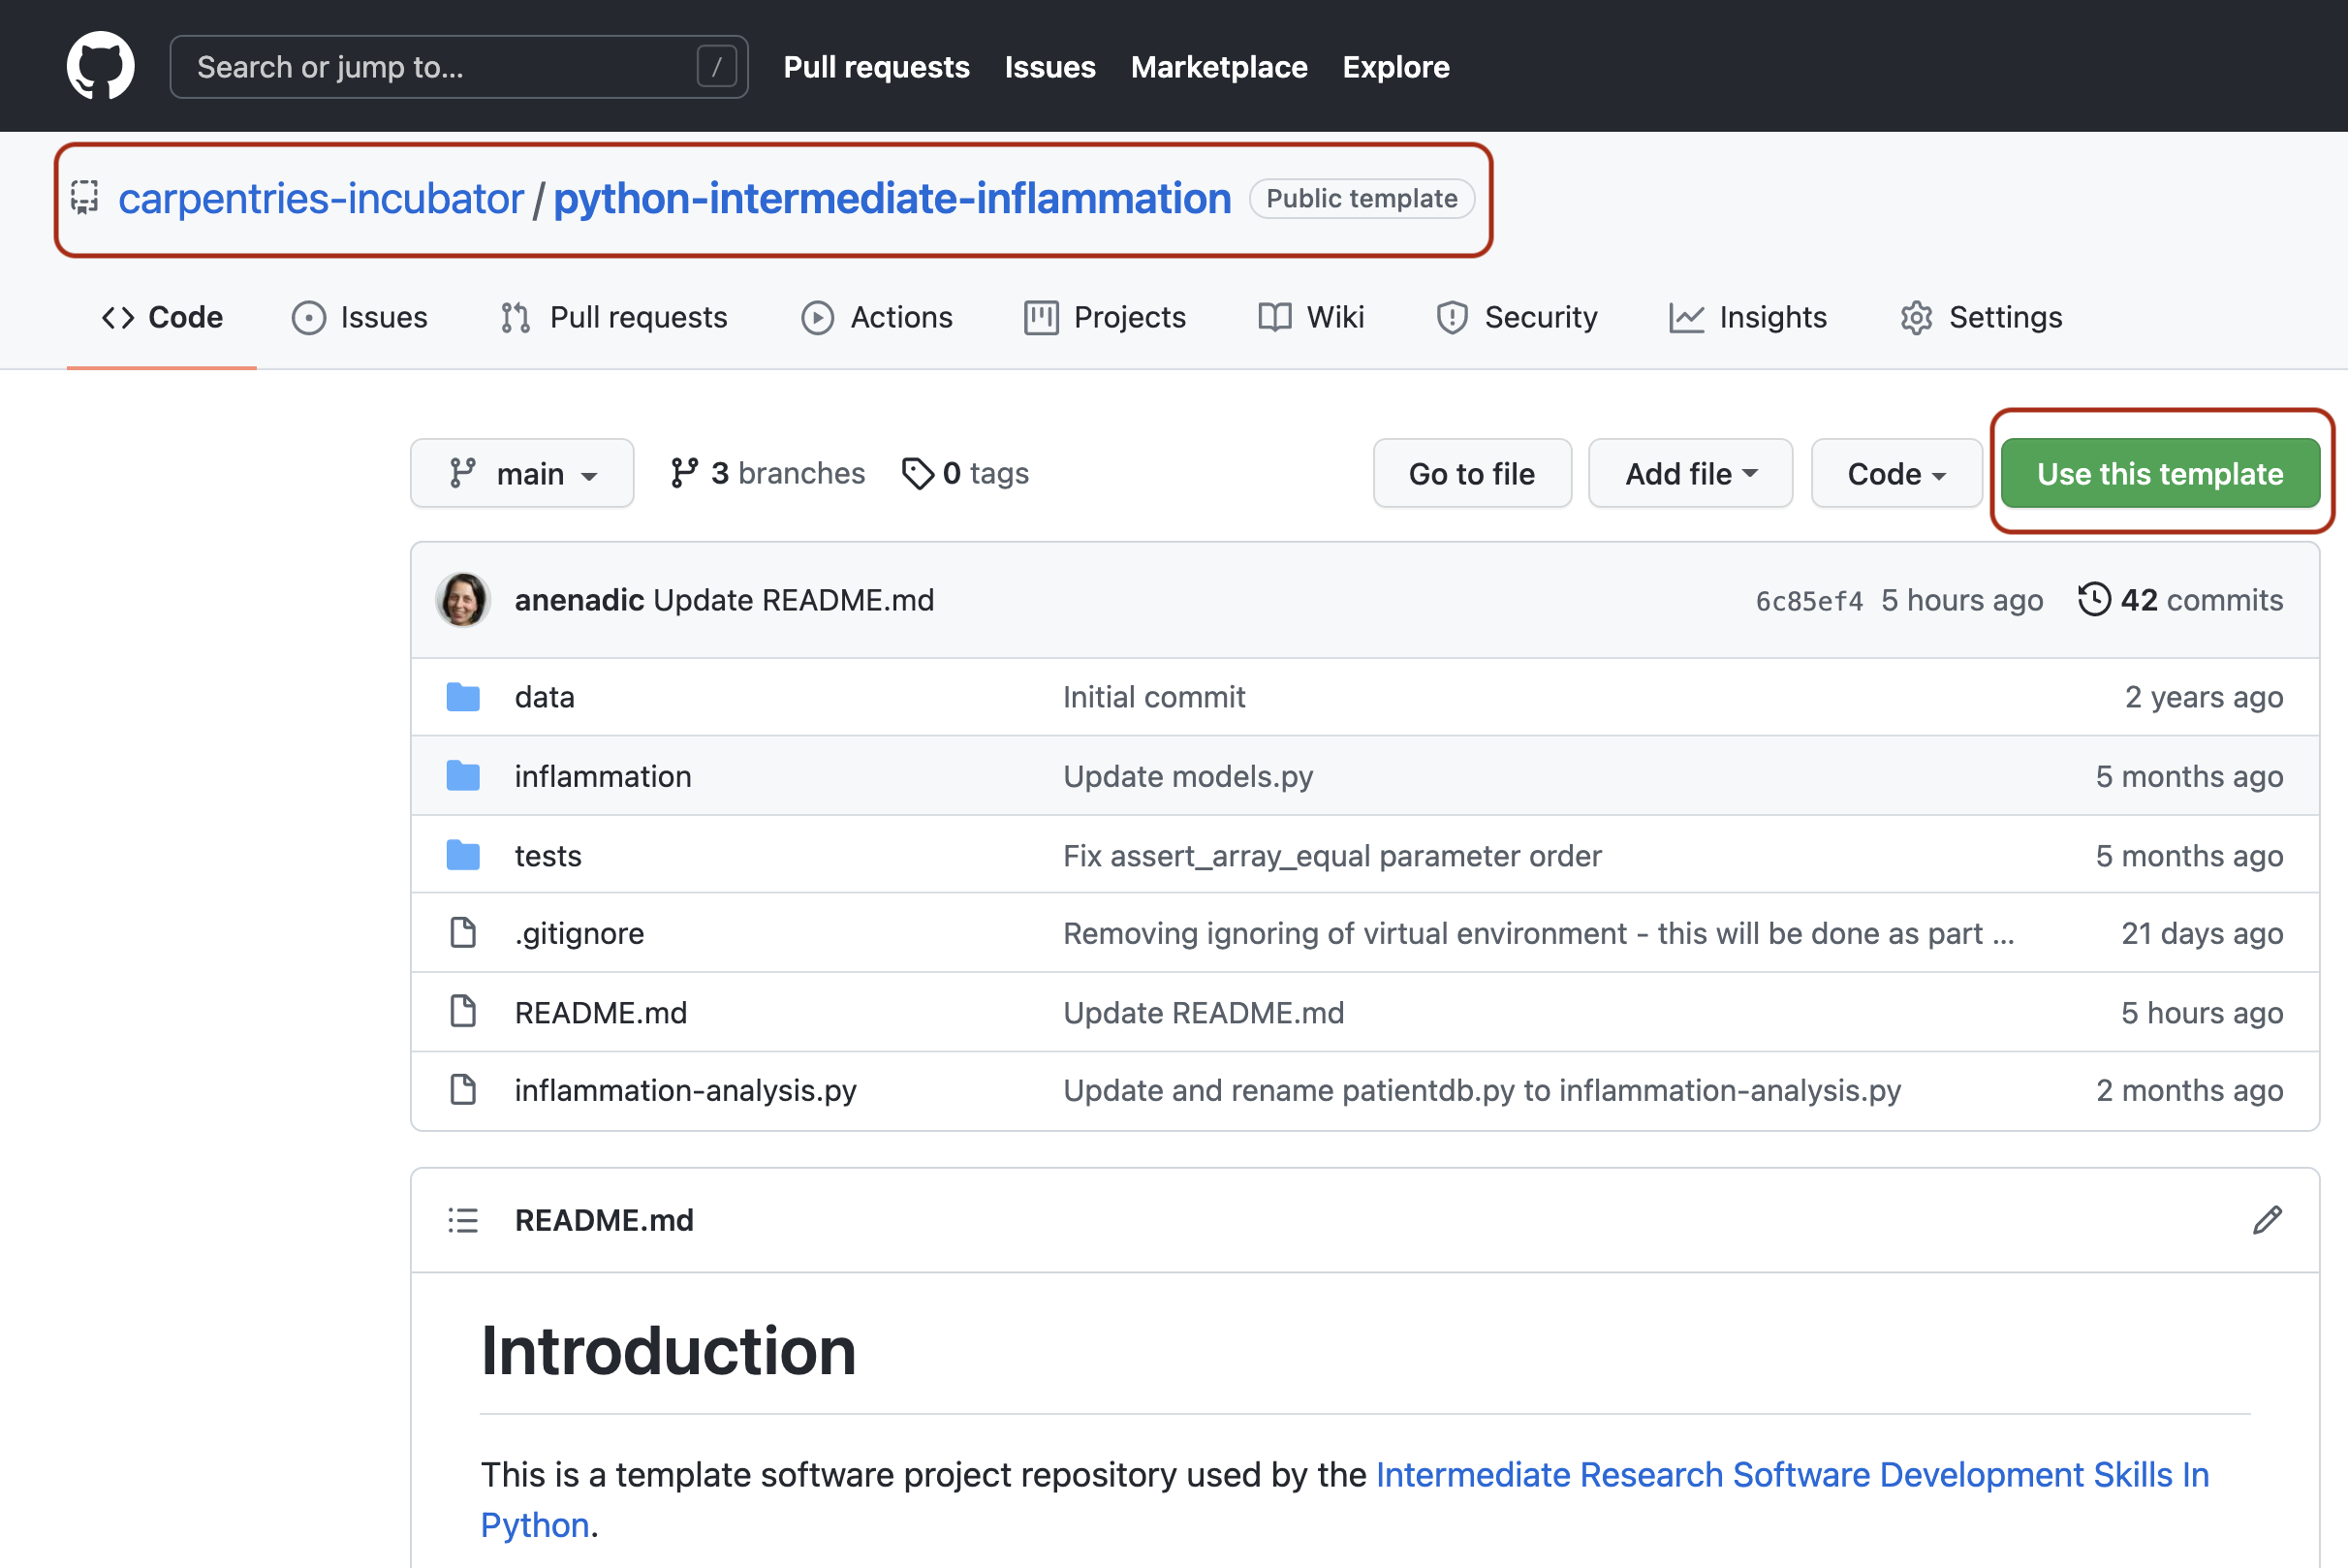 Software project template repository in GitHub